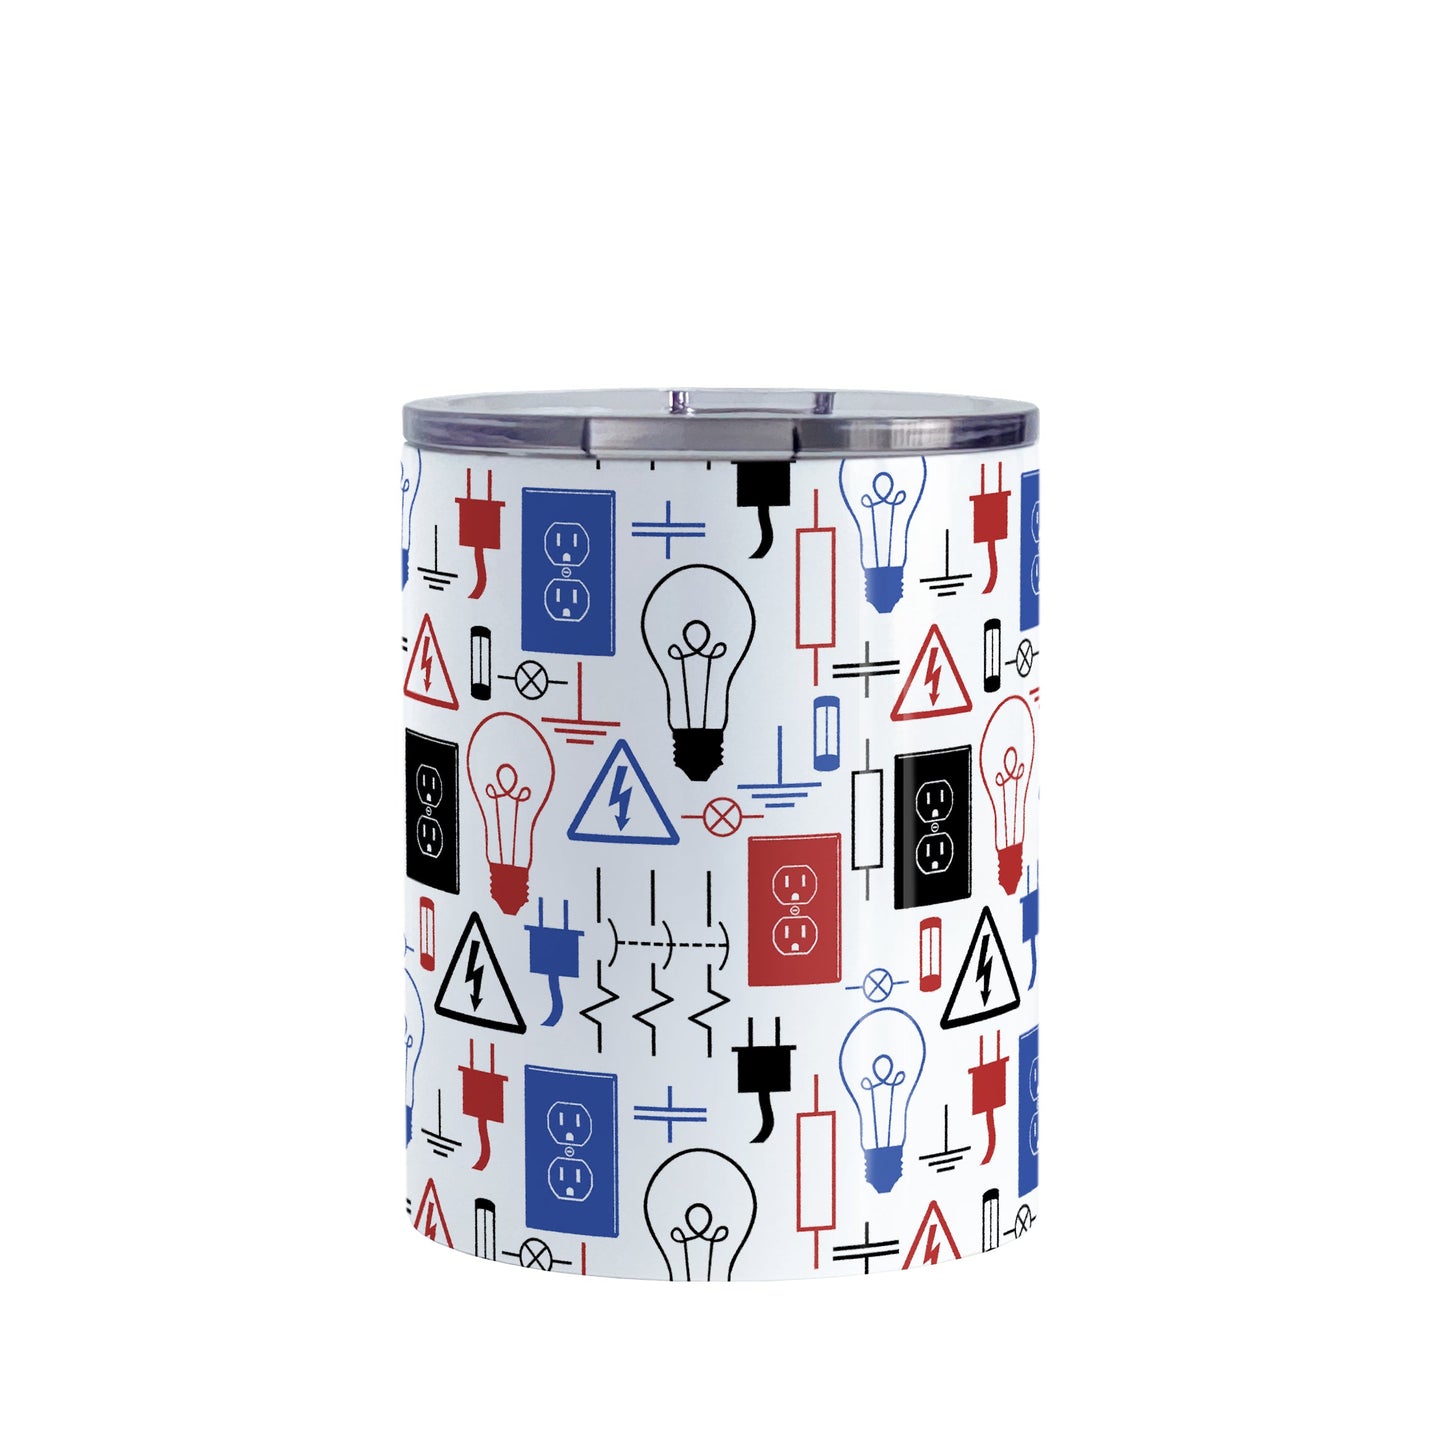 Red Blue Electrical Electrician Tumbler Cup (10oz) at Amy's Coffee Mugs. A stainless steel insulated tumbler cup designed with an electrical pattern with light bulbs, wall sockets, plugs, fuses, and other electricity symbols in red, blue, and black colors that wraps around the cup. This cup is perfect for people who work a trade as an electrician, love working with electronics, and working in electrical engineering. 